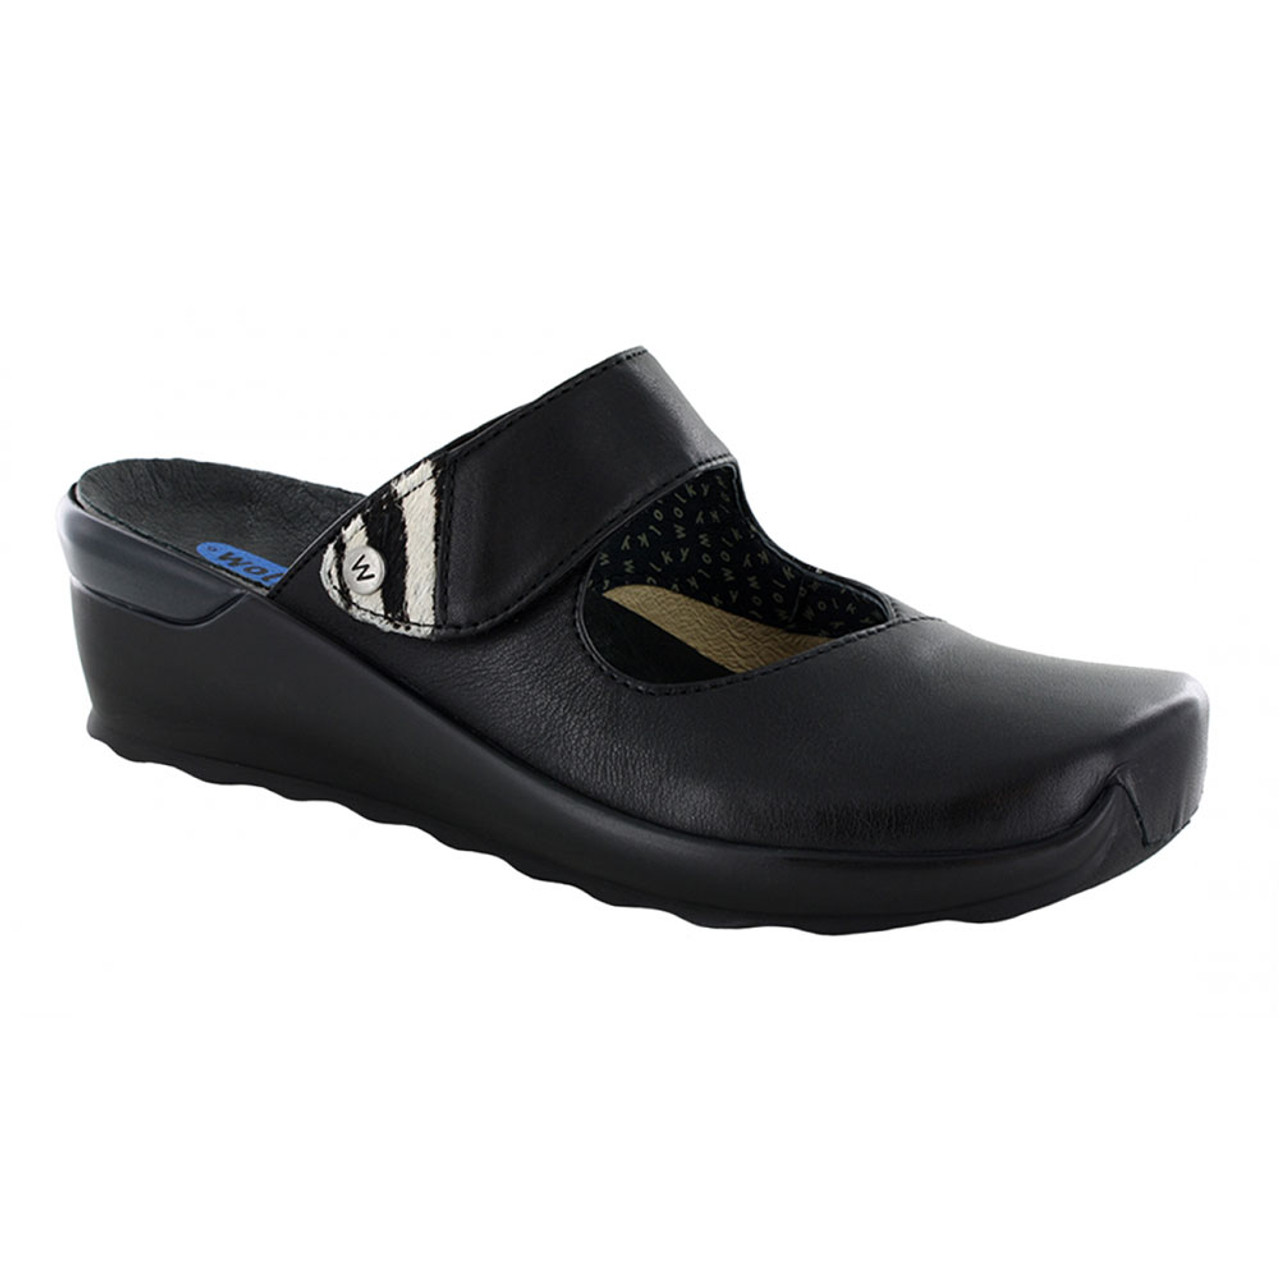 Wolky Women's Up Clog - Black | Discount Wolky Ladies Shoes & More ...